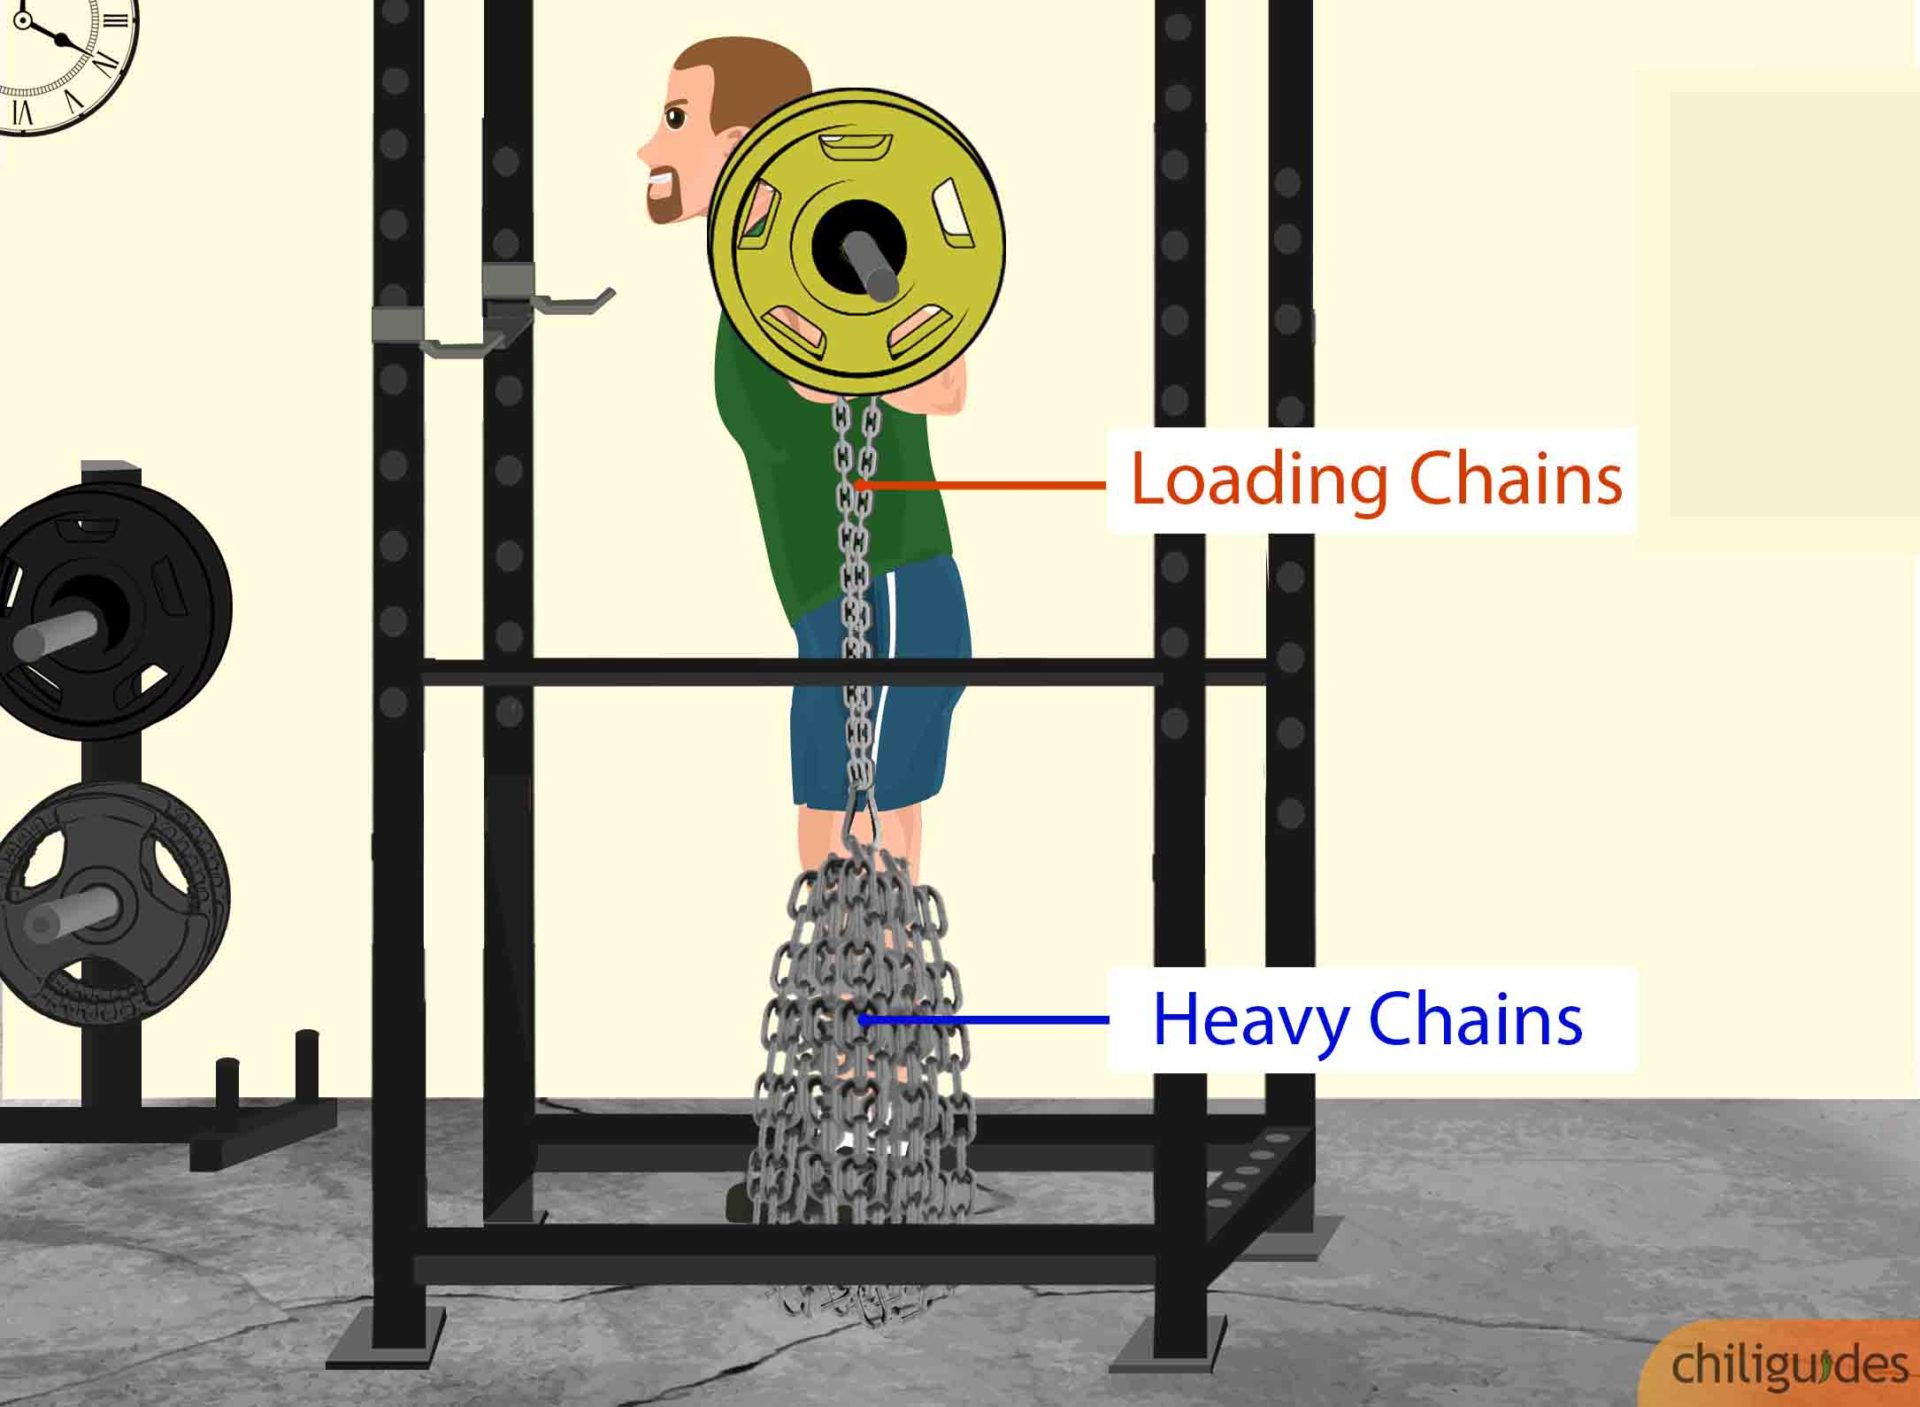 Get heavy chains that are at least 6 feet and loading chains that are 6.5 feet